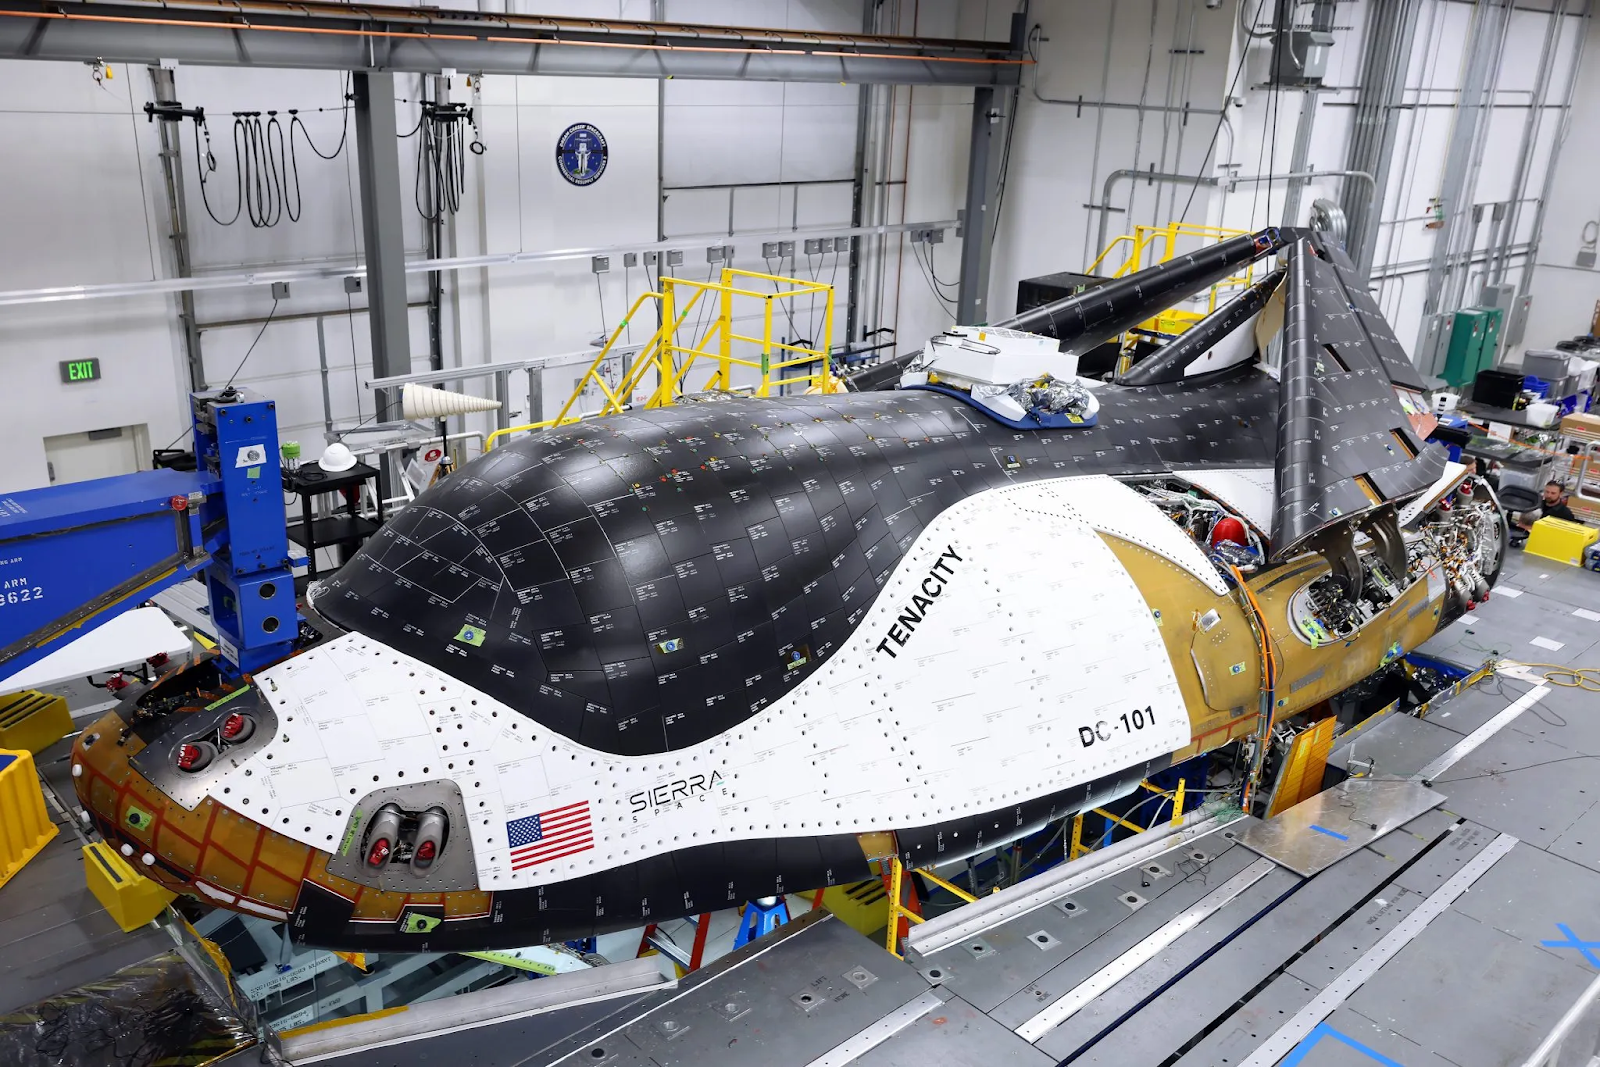 a Dream Chaser spacecraft in a warehouse